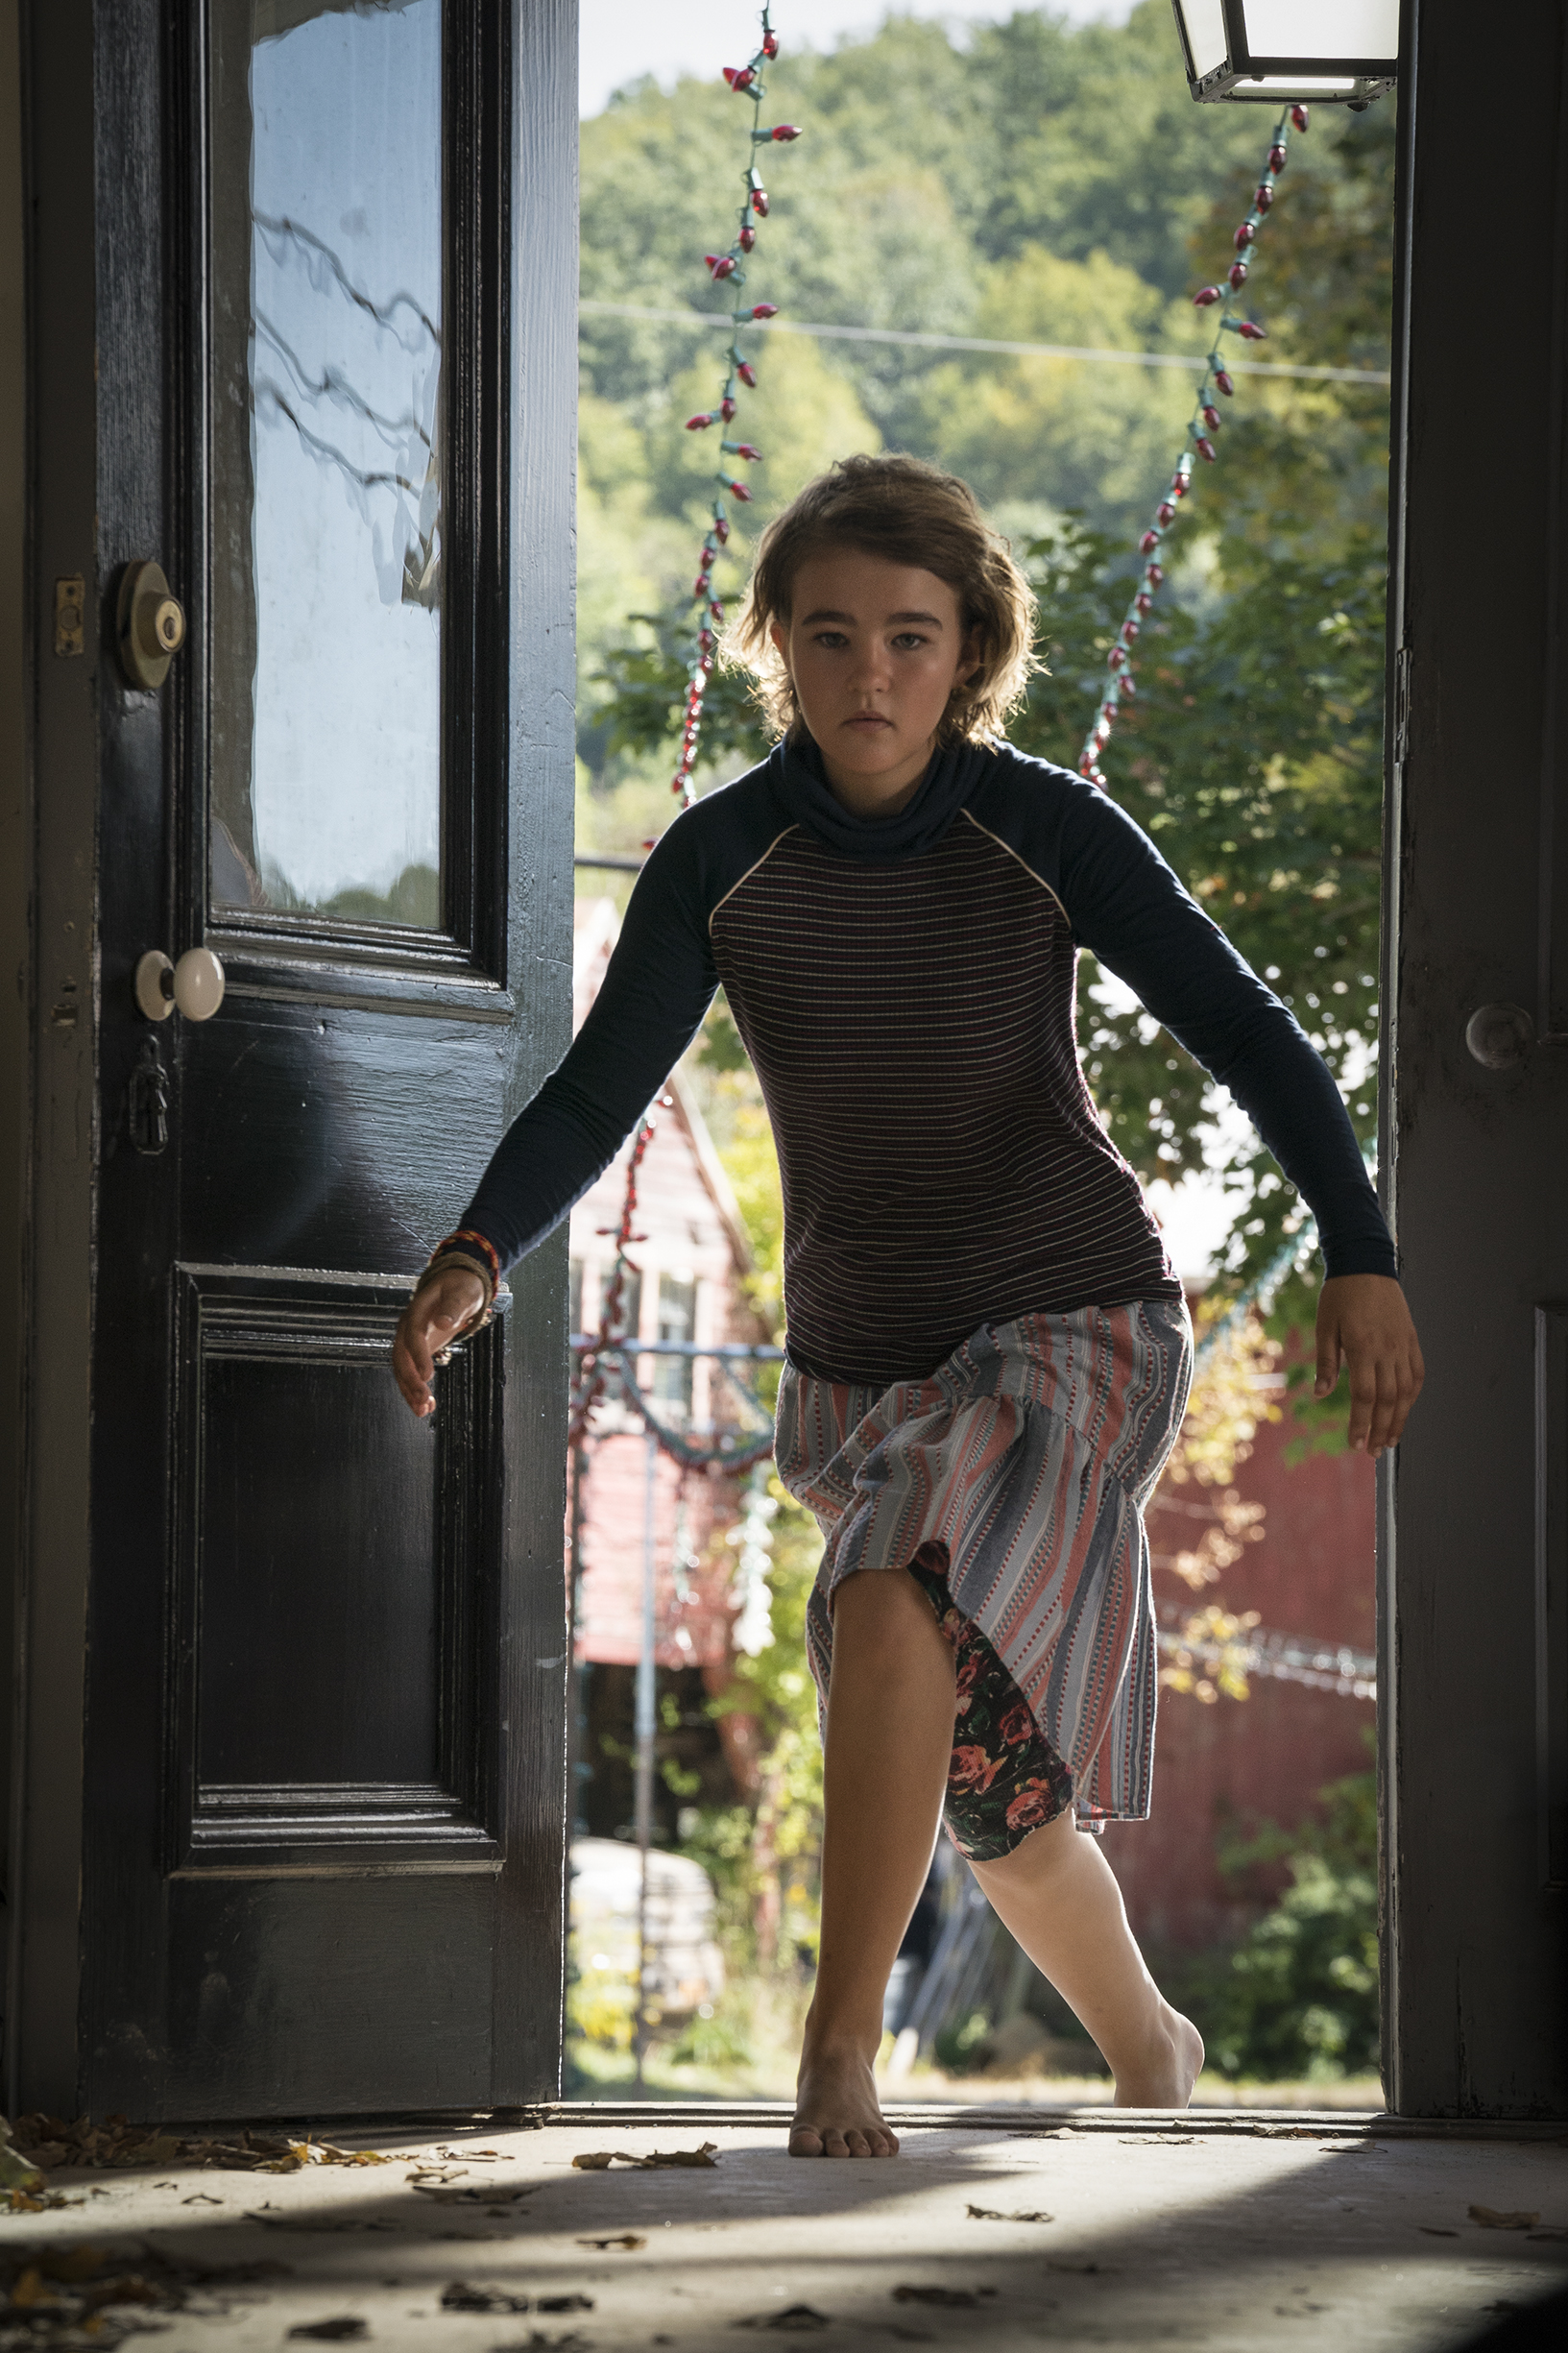 breakout star Millicent Simmonds, a deaf actor who plays the teenage daughter, delivers a defiant turn that establishes her as an exciting young talent. (Paramount Pictures)